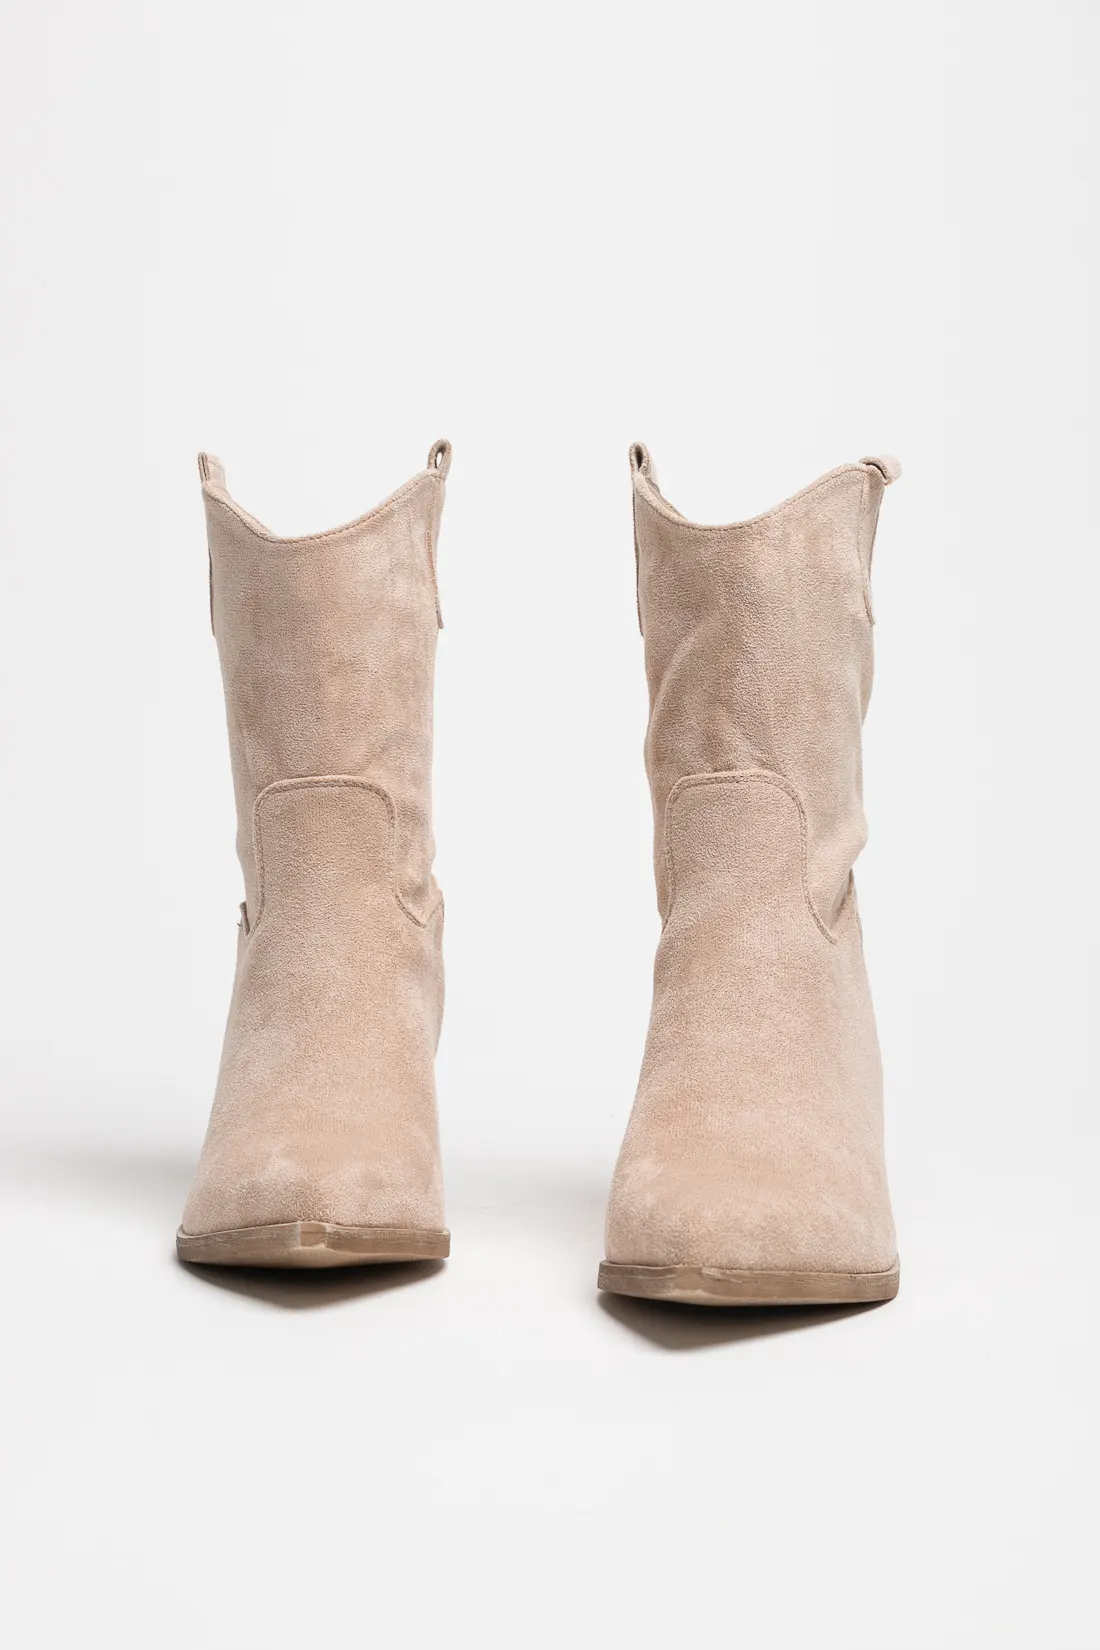 LOW COUNTRY BOOT CORCELY - BEIGE